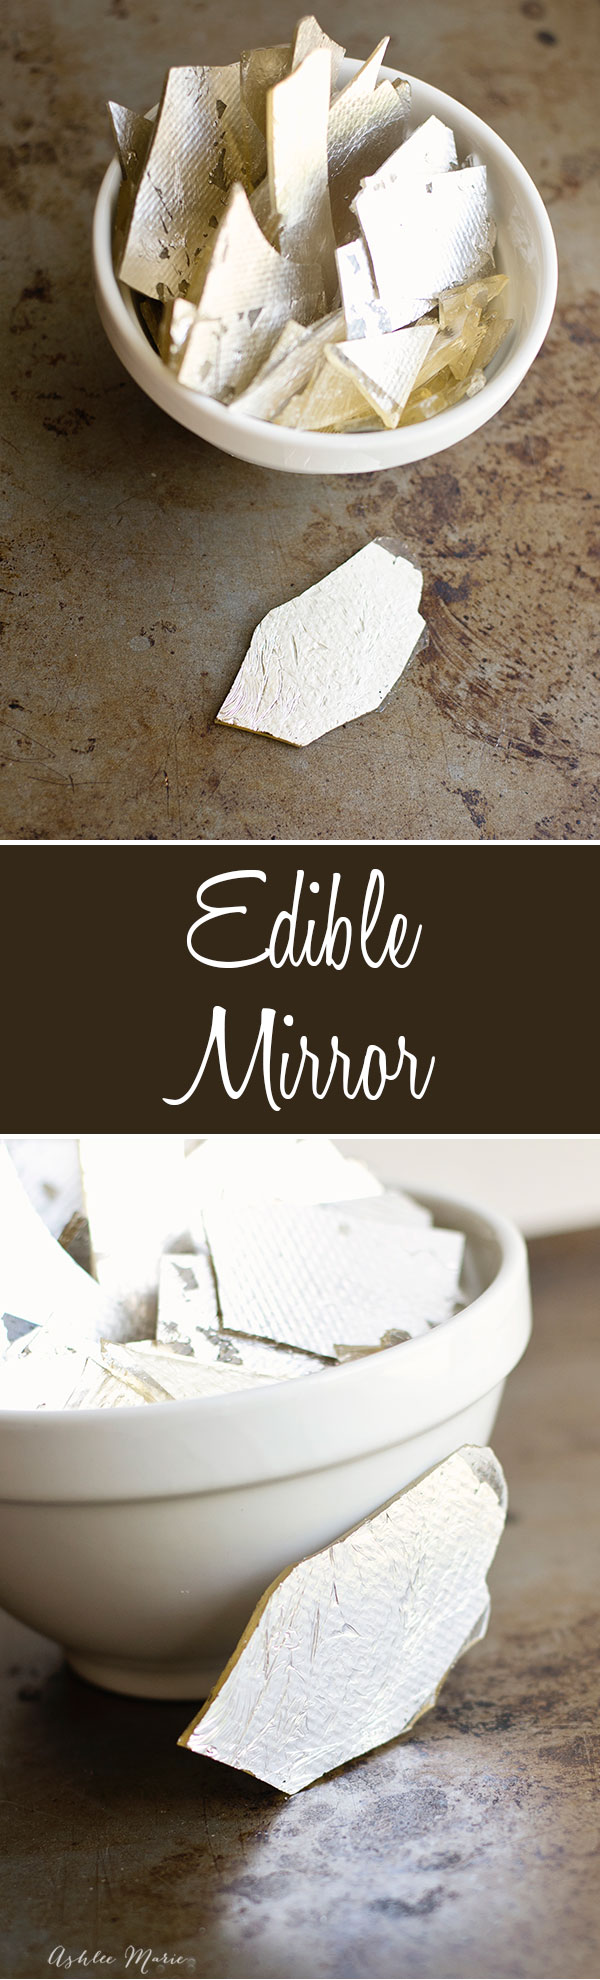 a easy recipe and video tutorial to create edible mirrors.